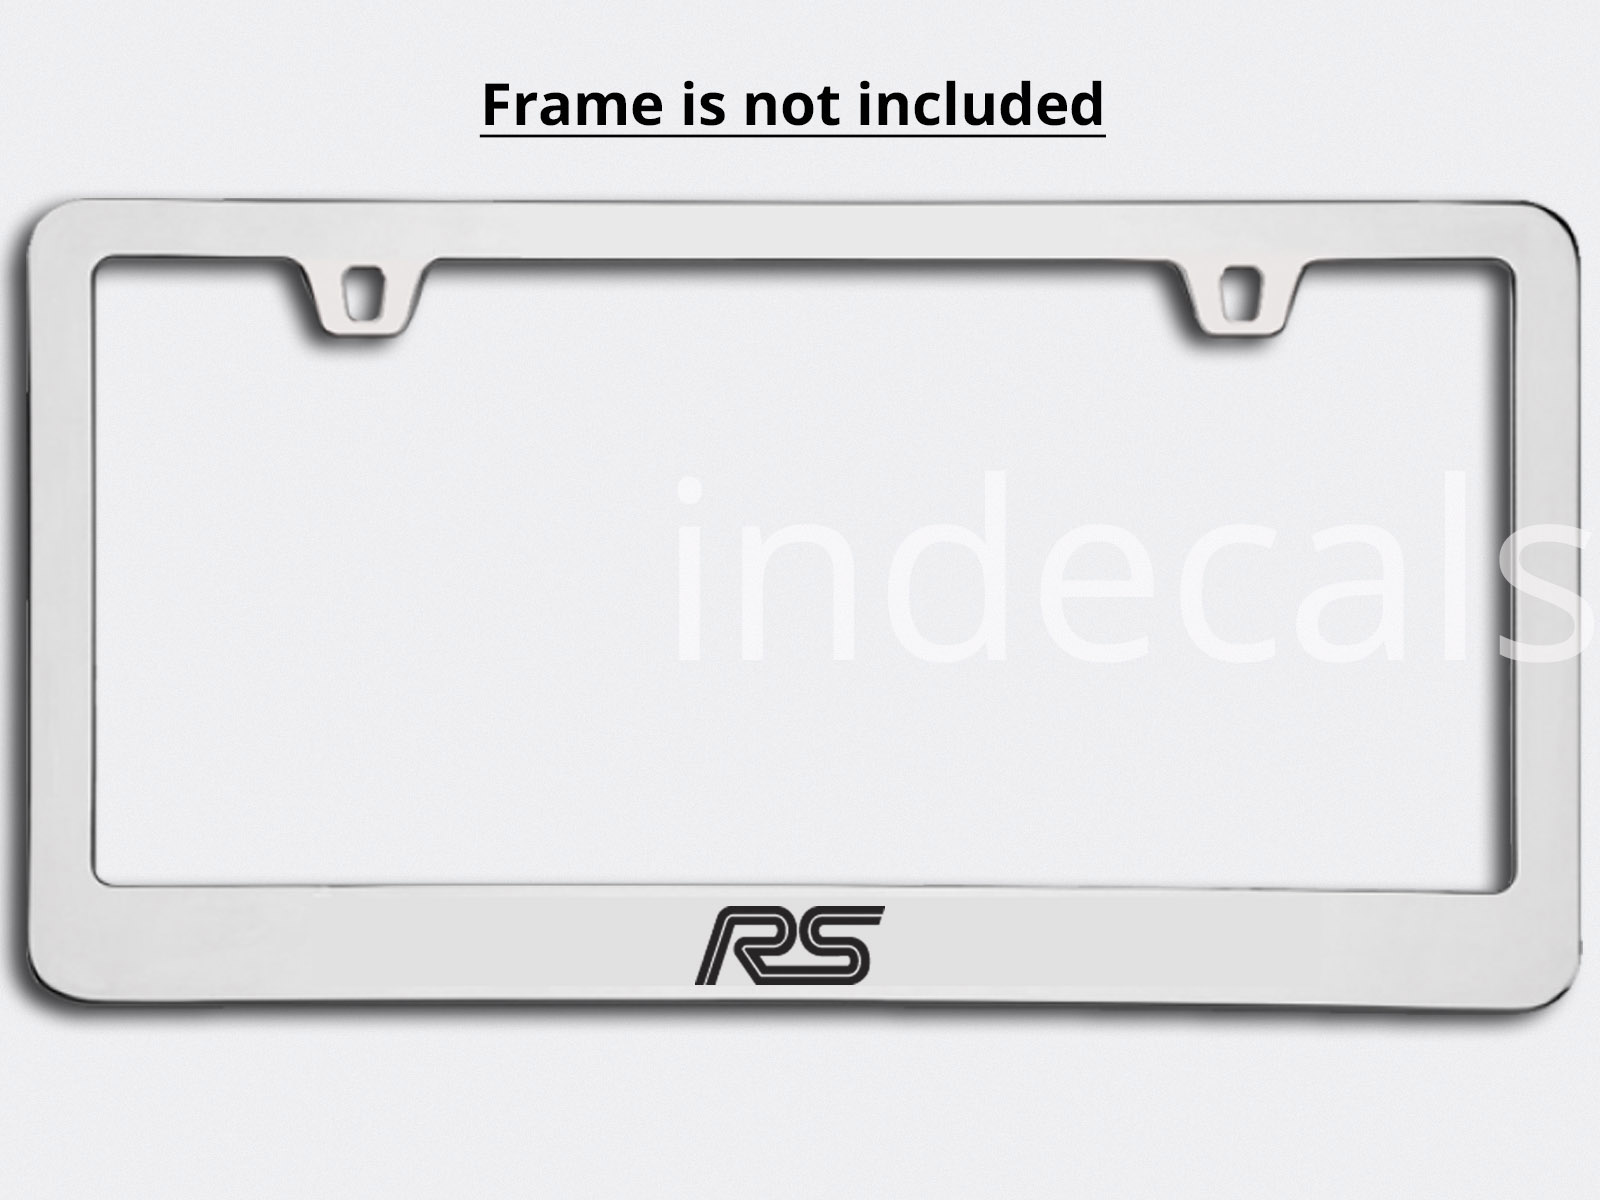 3 x Ford RS Stickers for License Plate Frame - Black